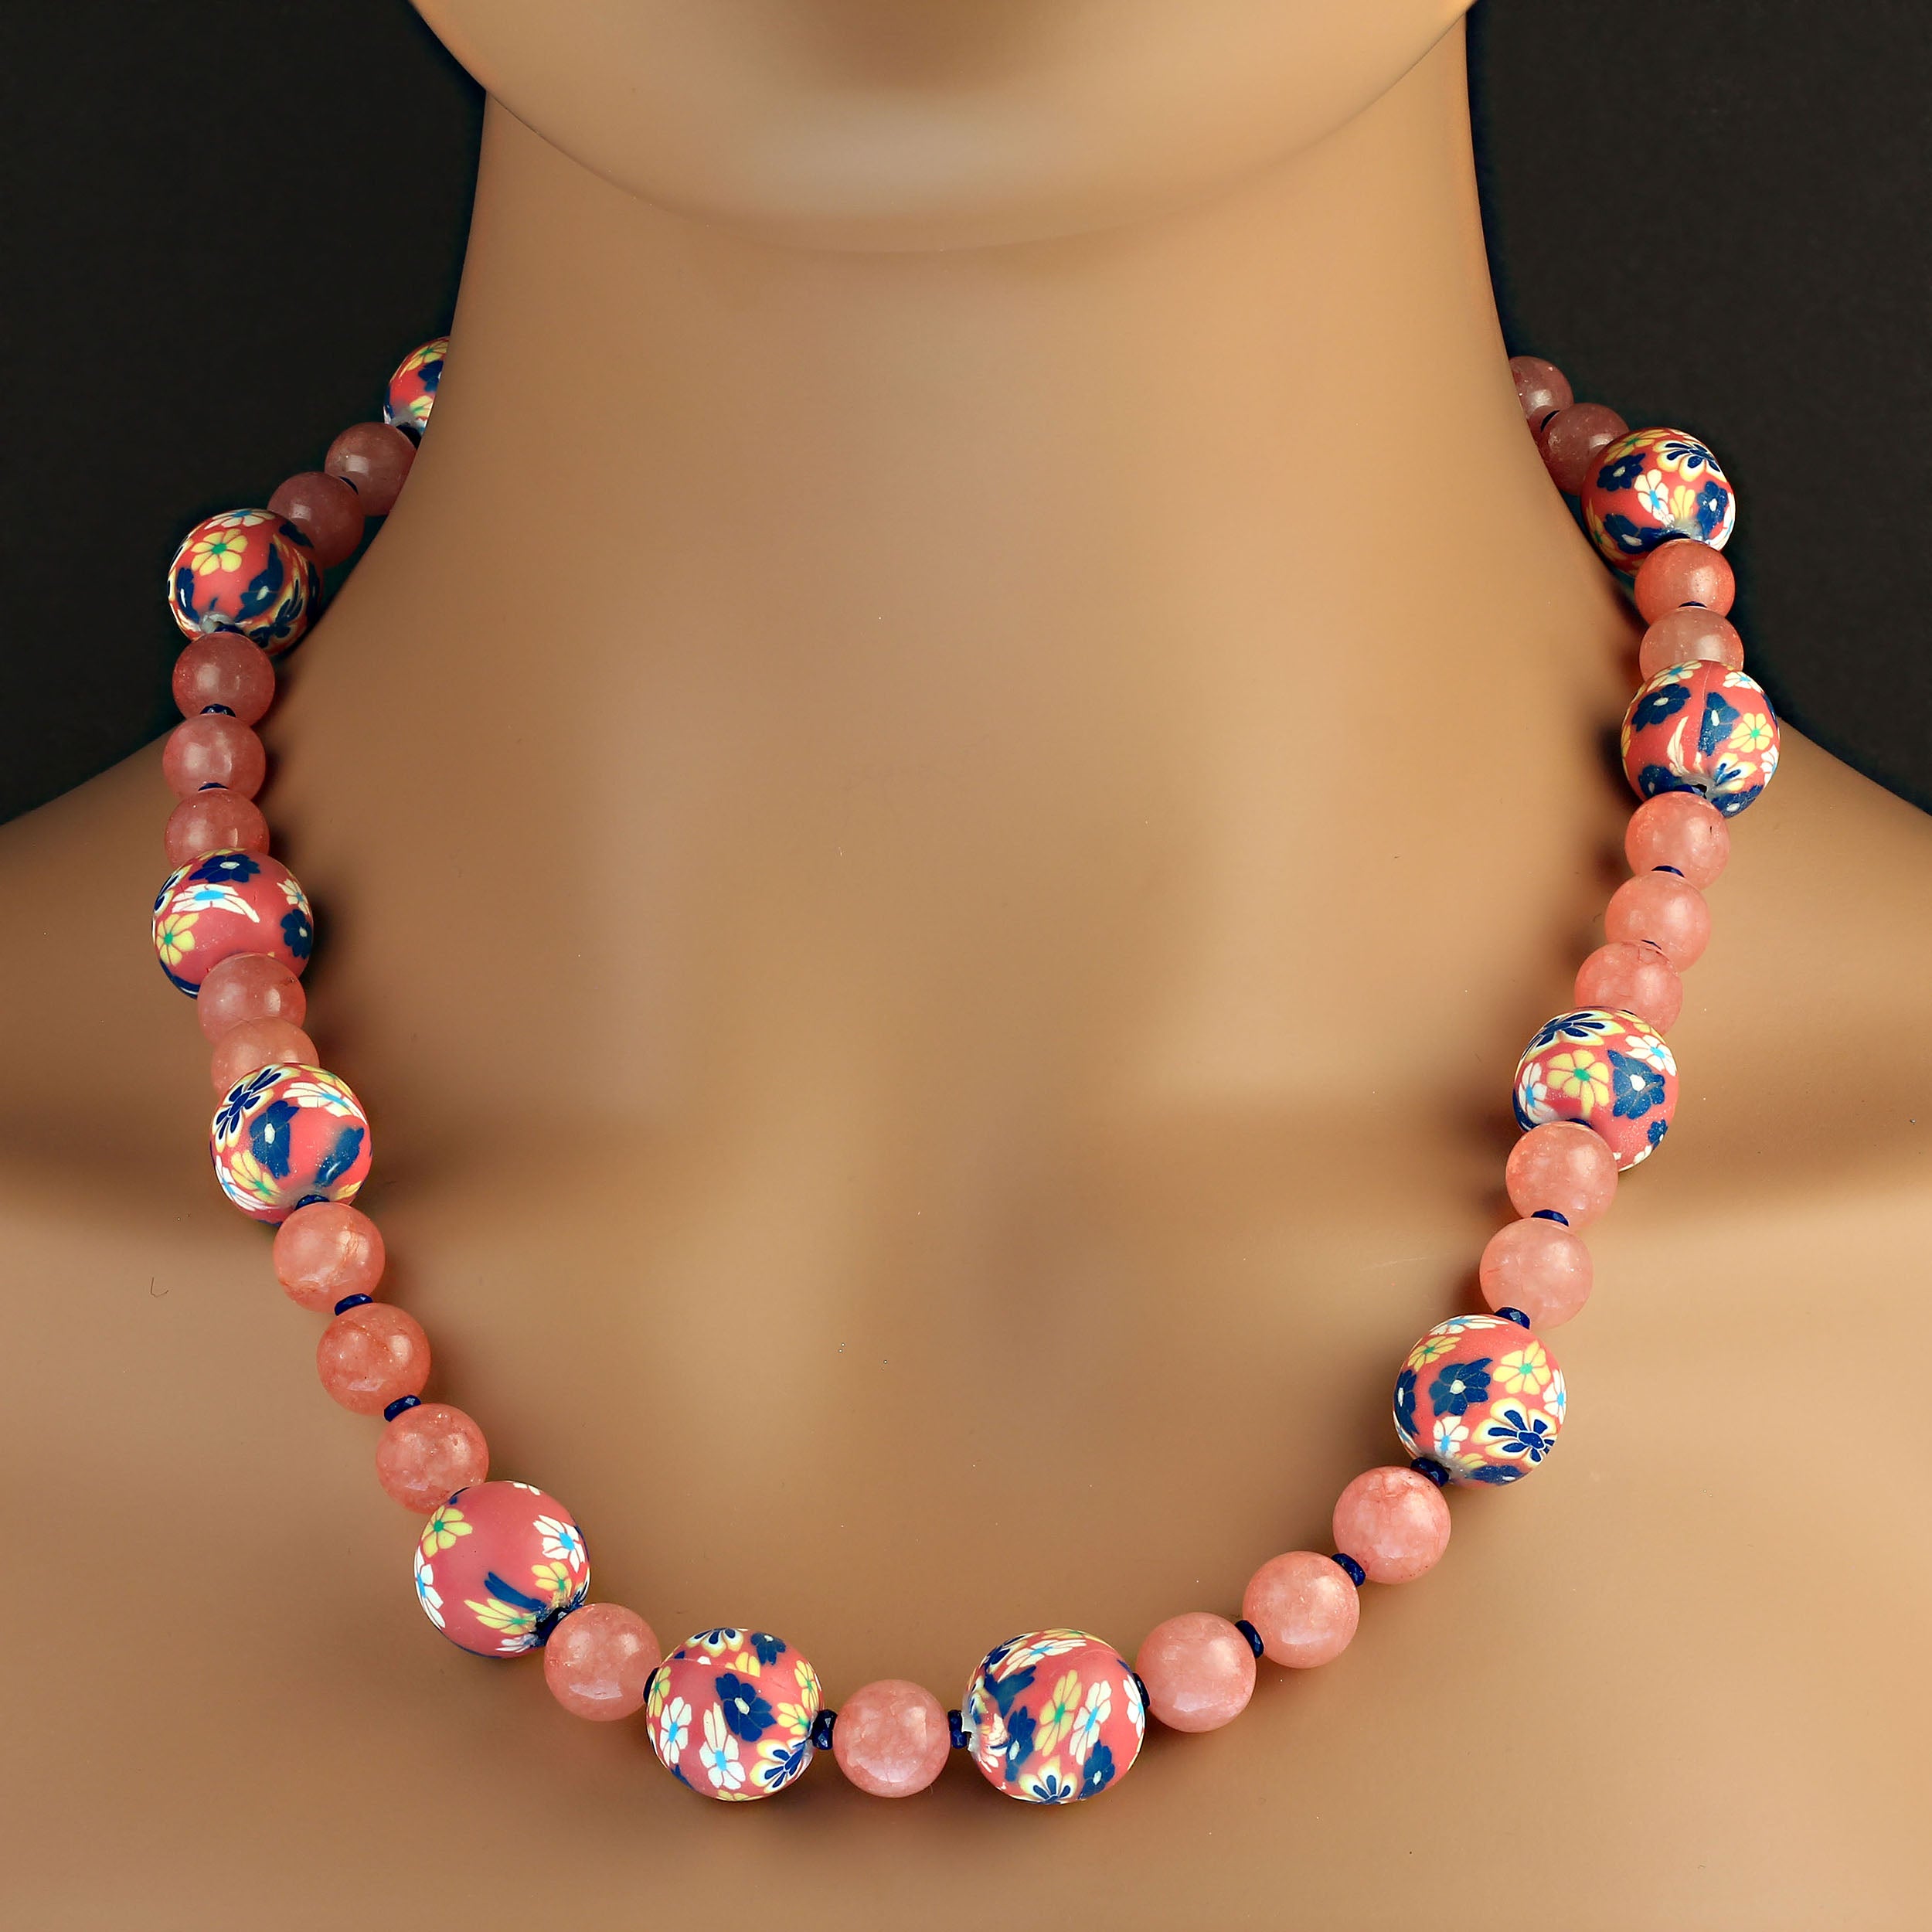 AJD Perfect Spring / Summer Necklace in Pink Agate and Fun Chinese Beads